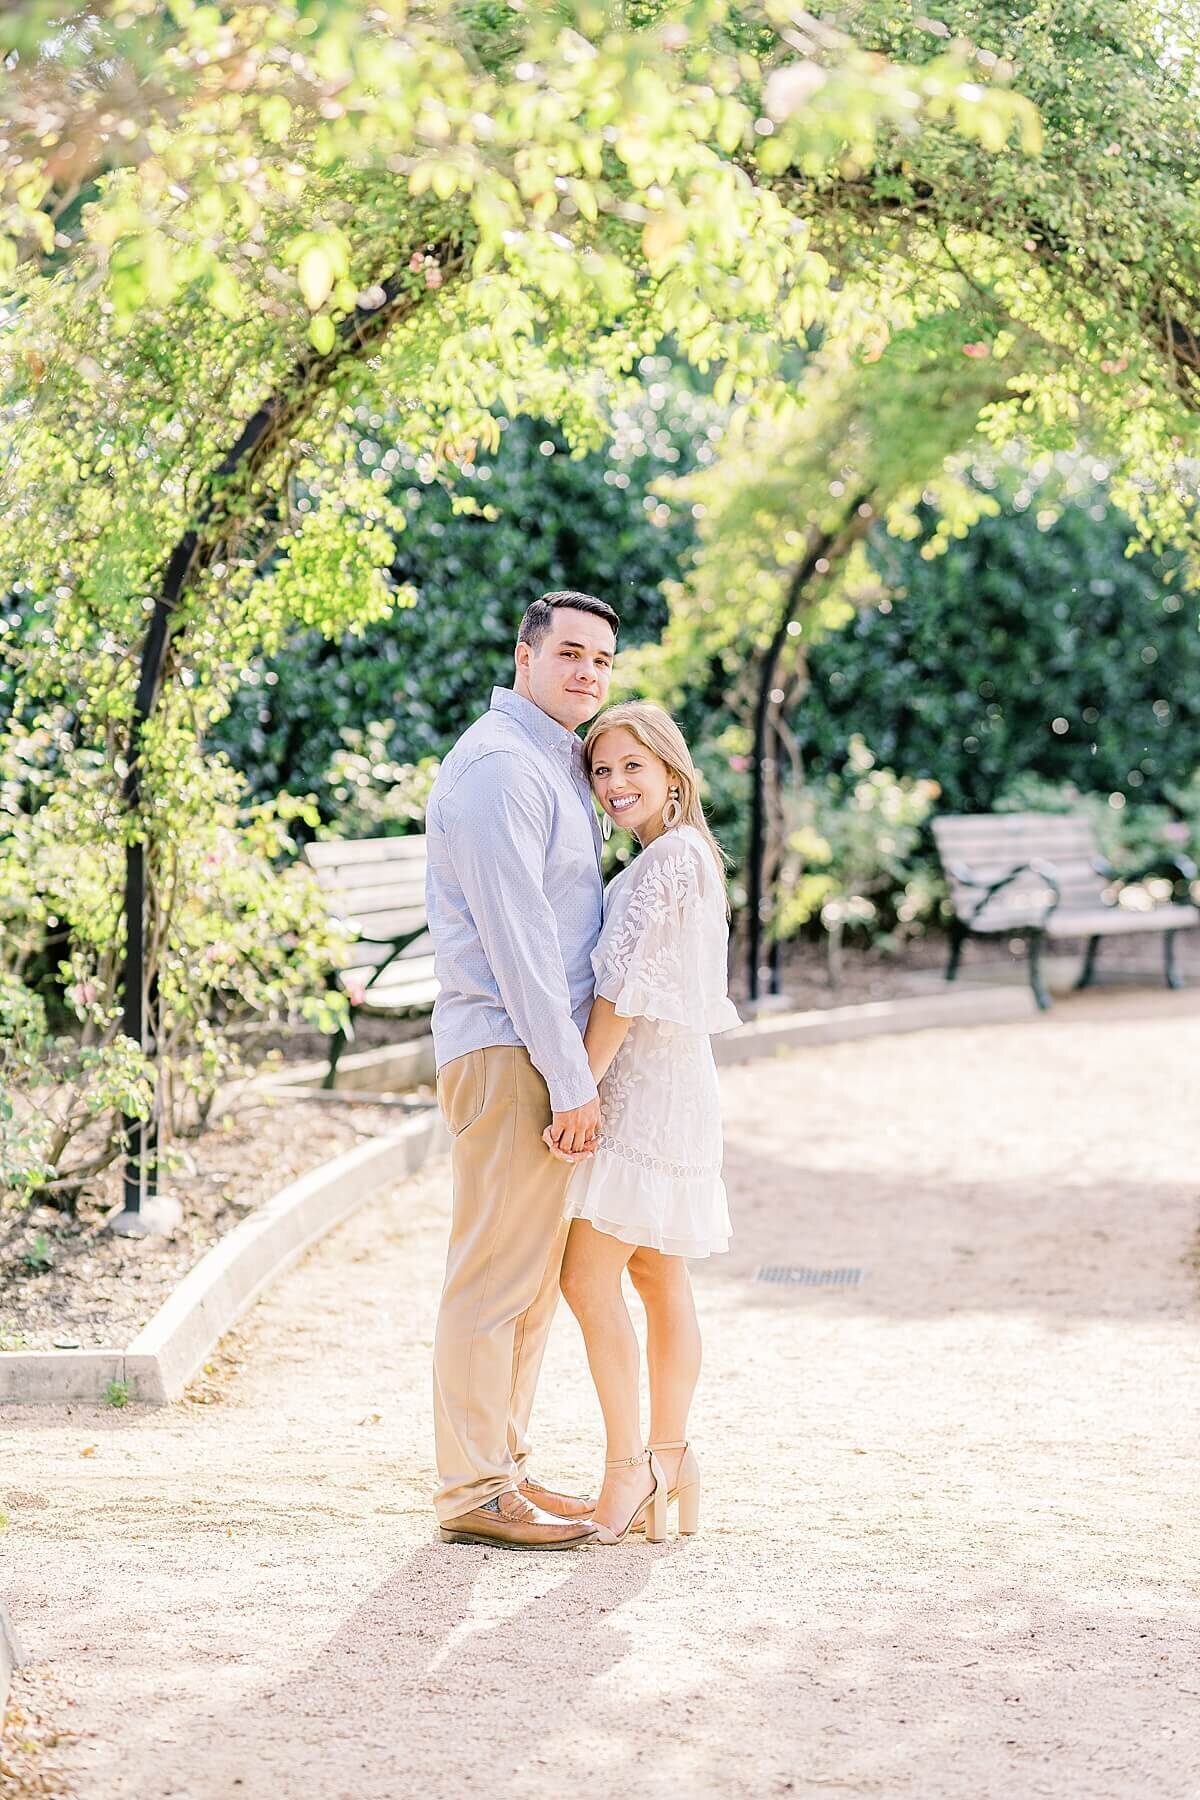 McGovern-Centennial-Gardens-Hermann-Park-Engagement-Session-Alicia-Yarrish-Photography_0046